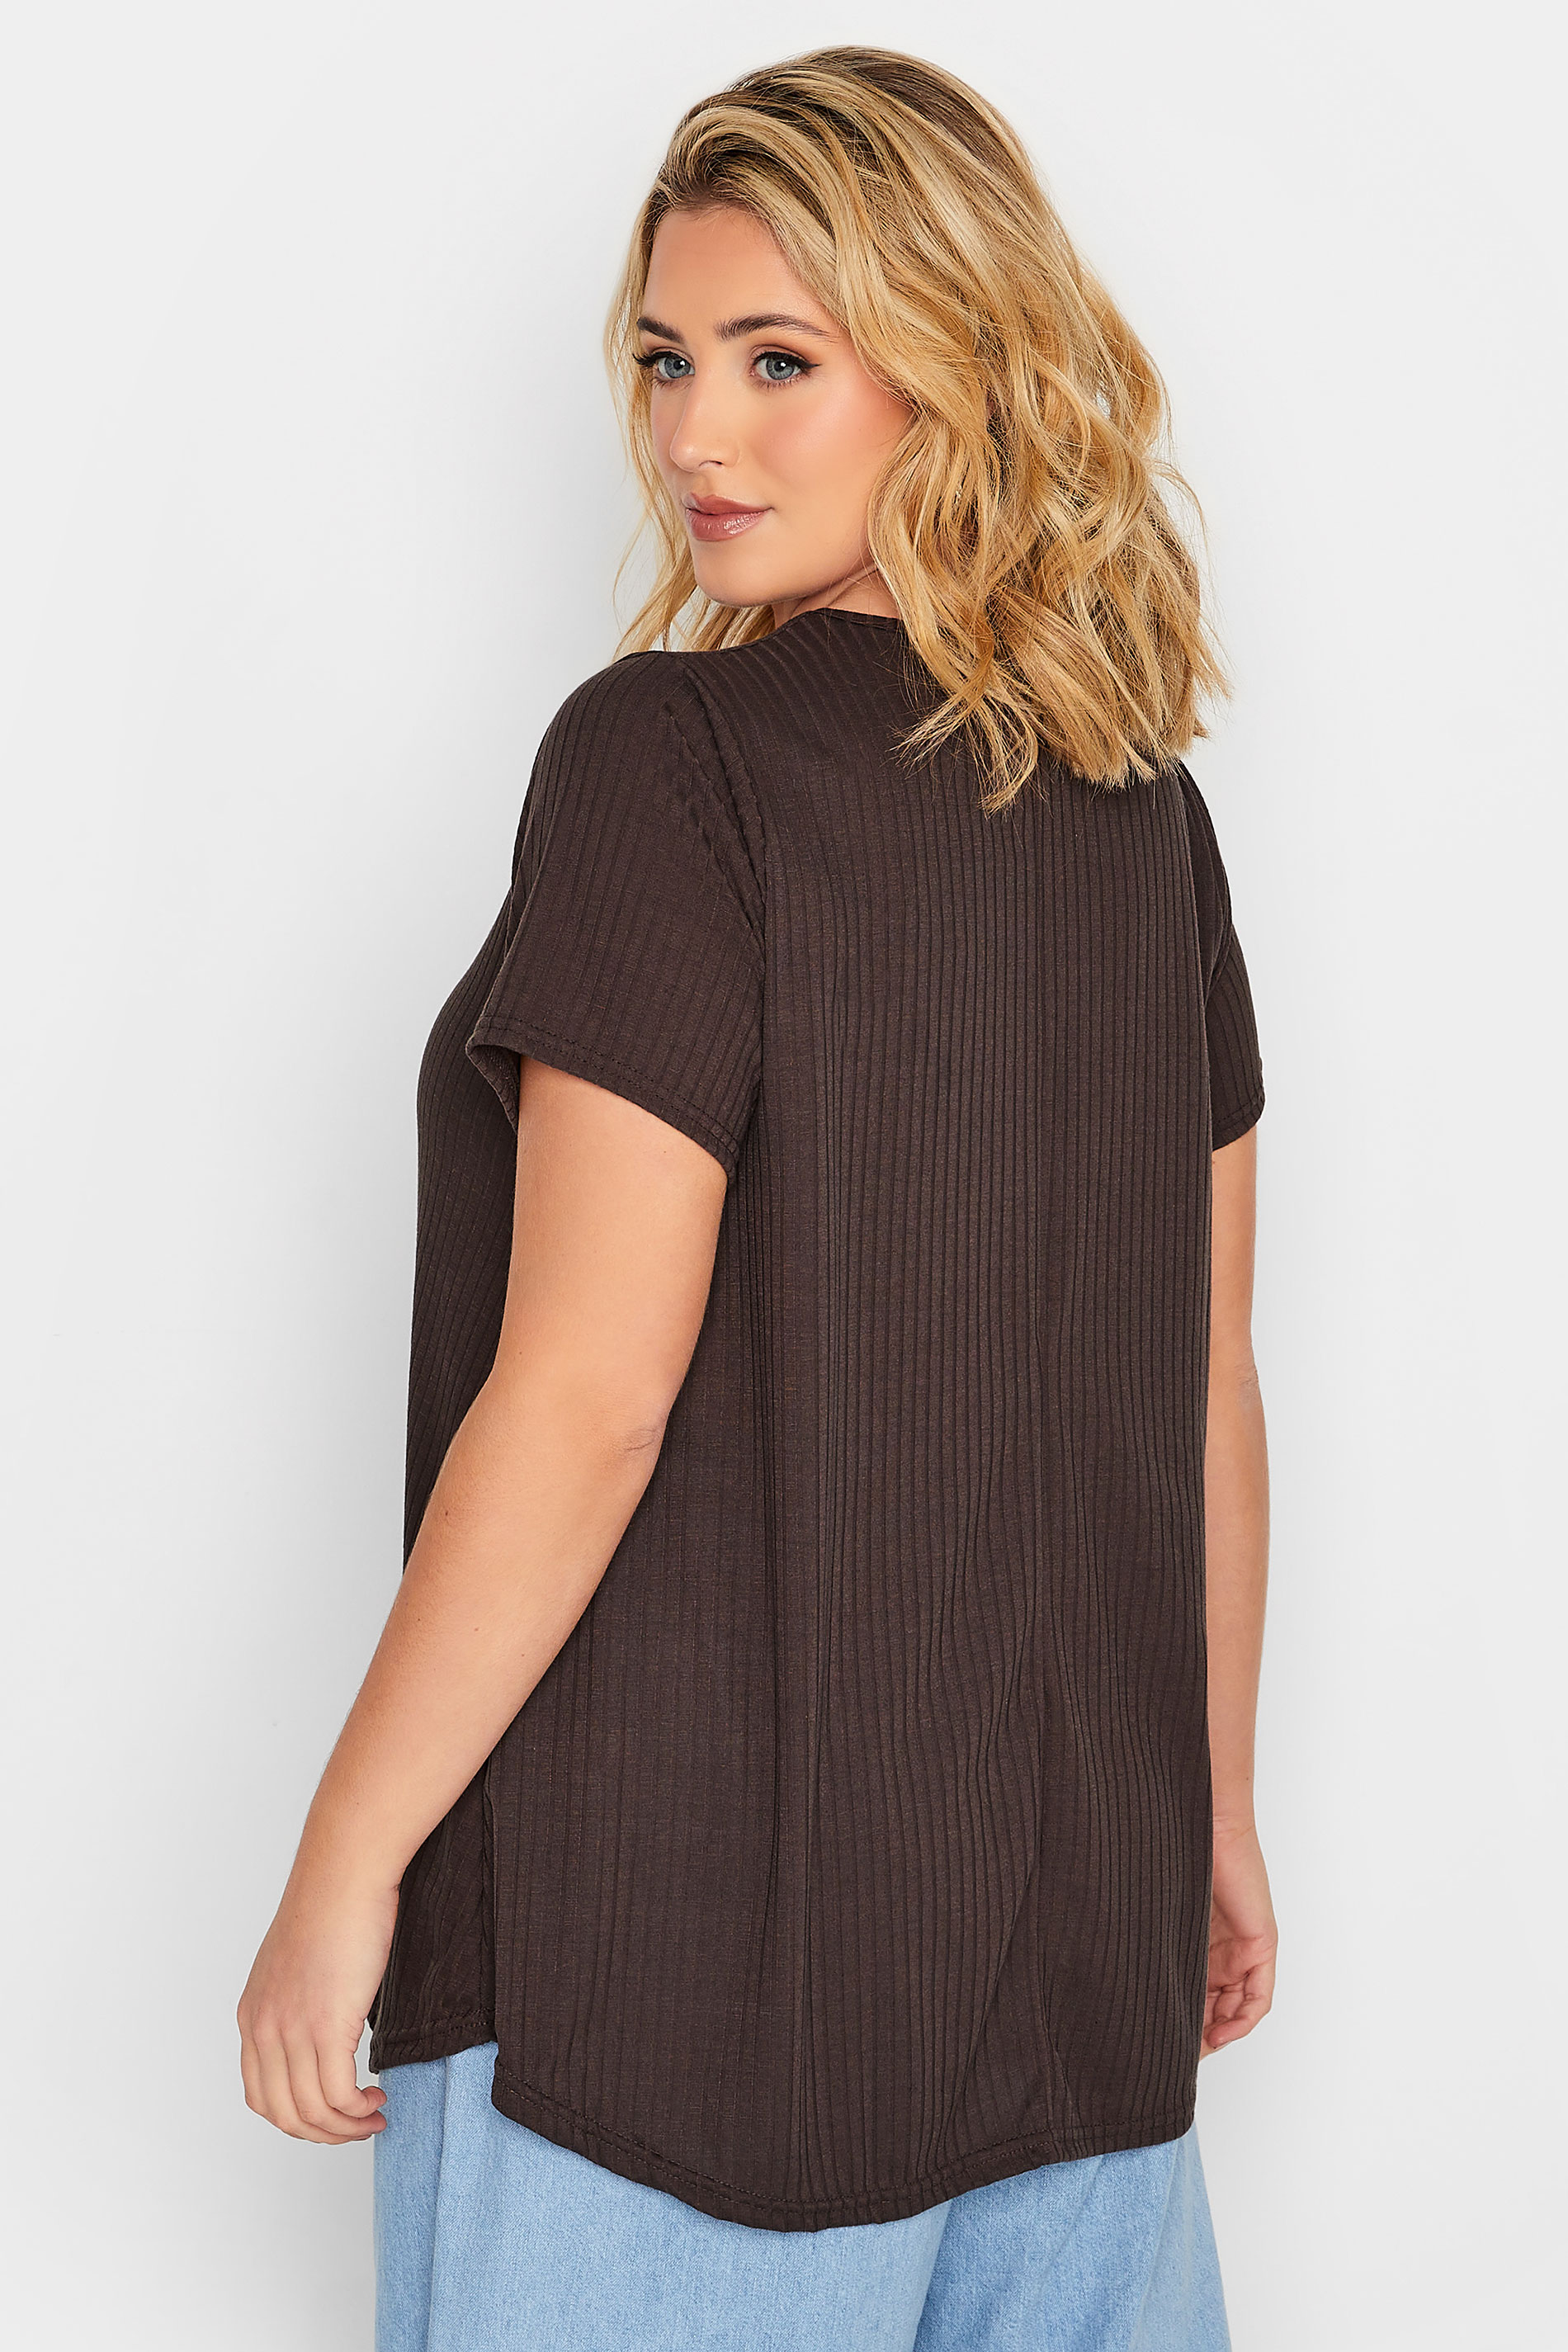 LIMITED COLLECTION Plus Size Chocolate Brown Ribbed Swing Top | Yours Clothing 3